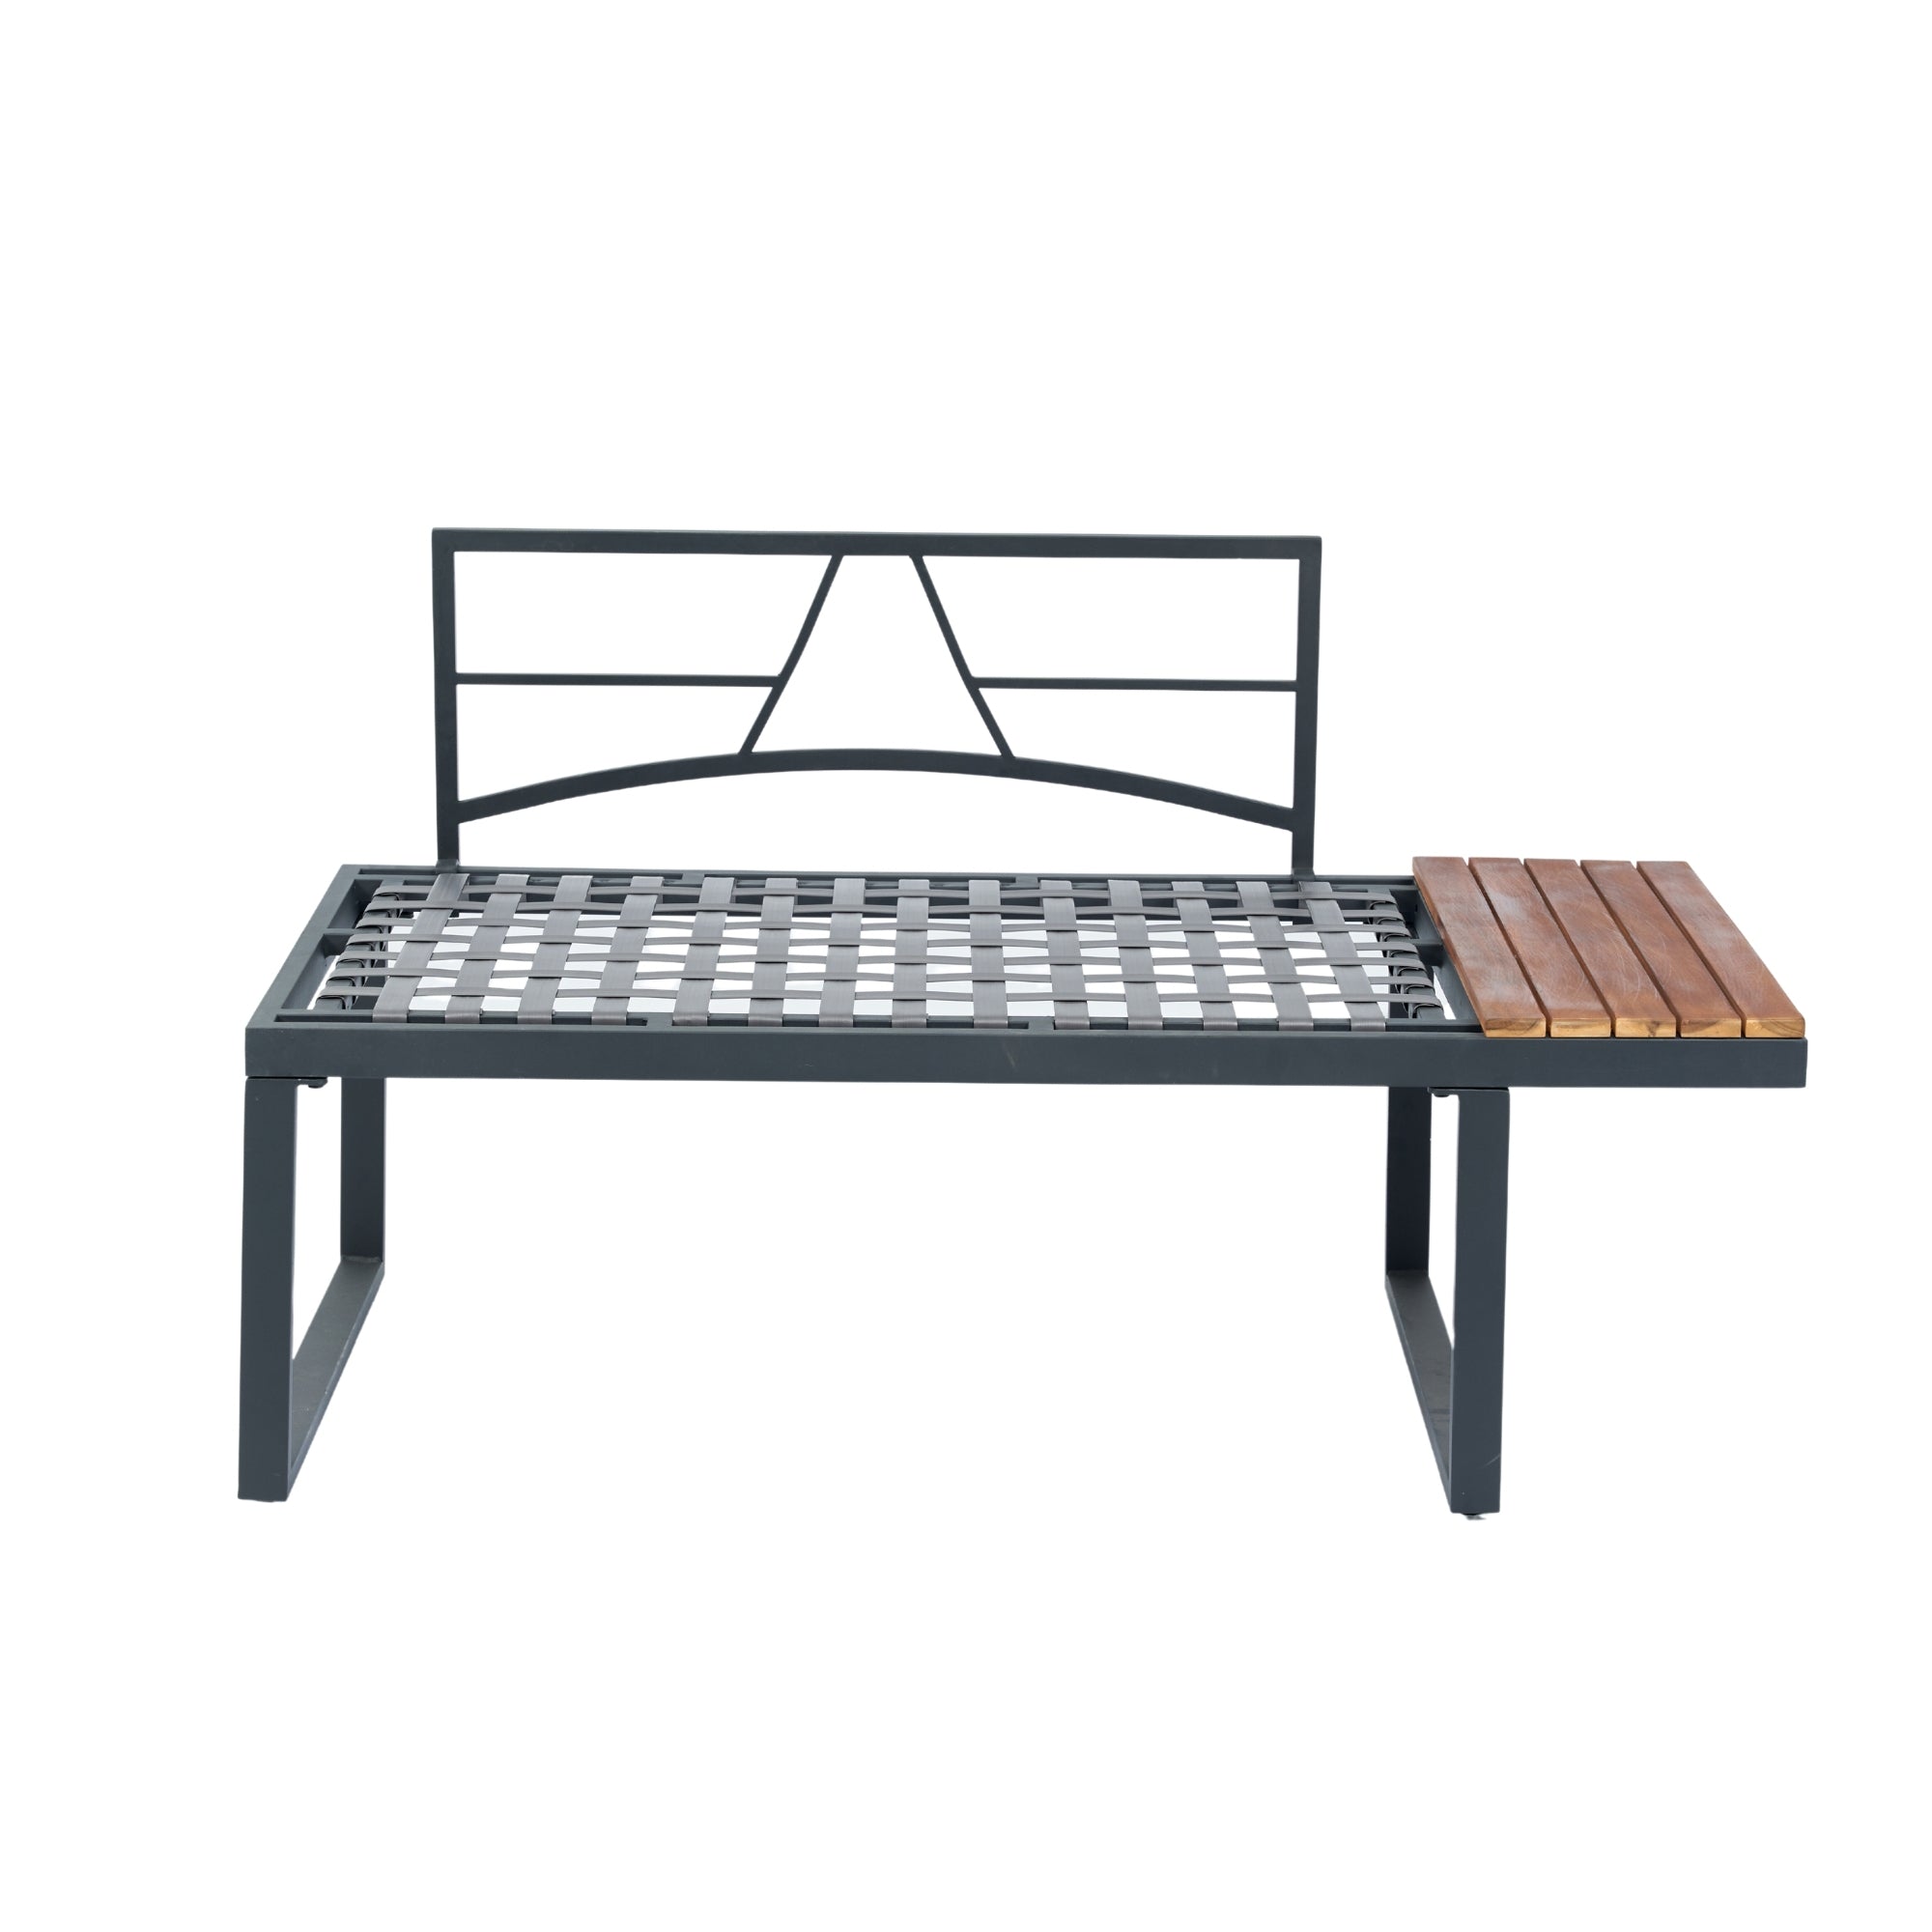 4 Piece L Shaped Patio Wicker Outdoor 5 Seater